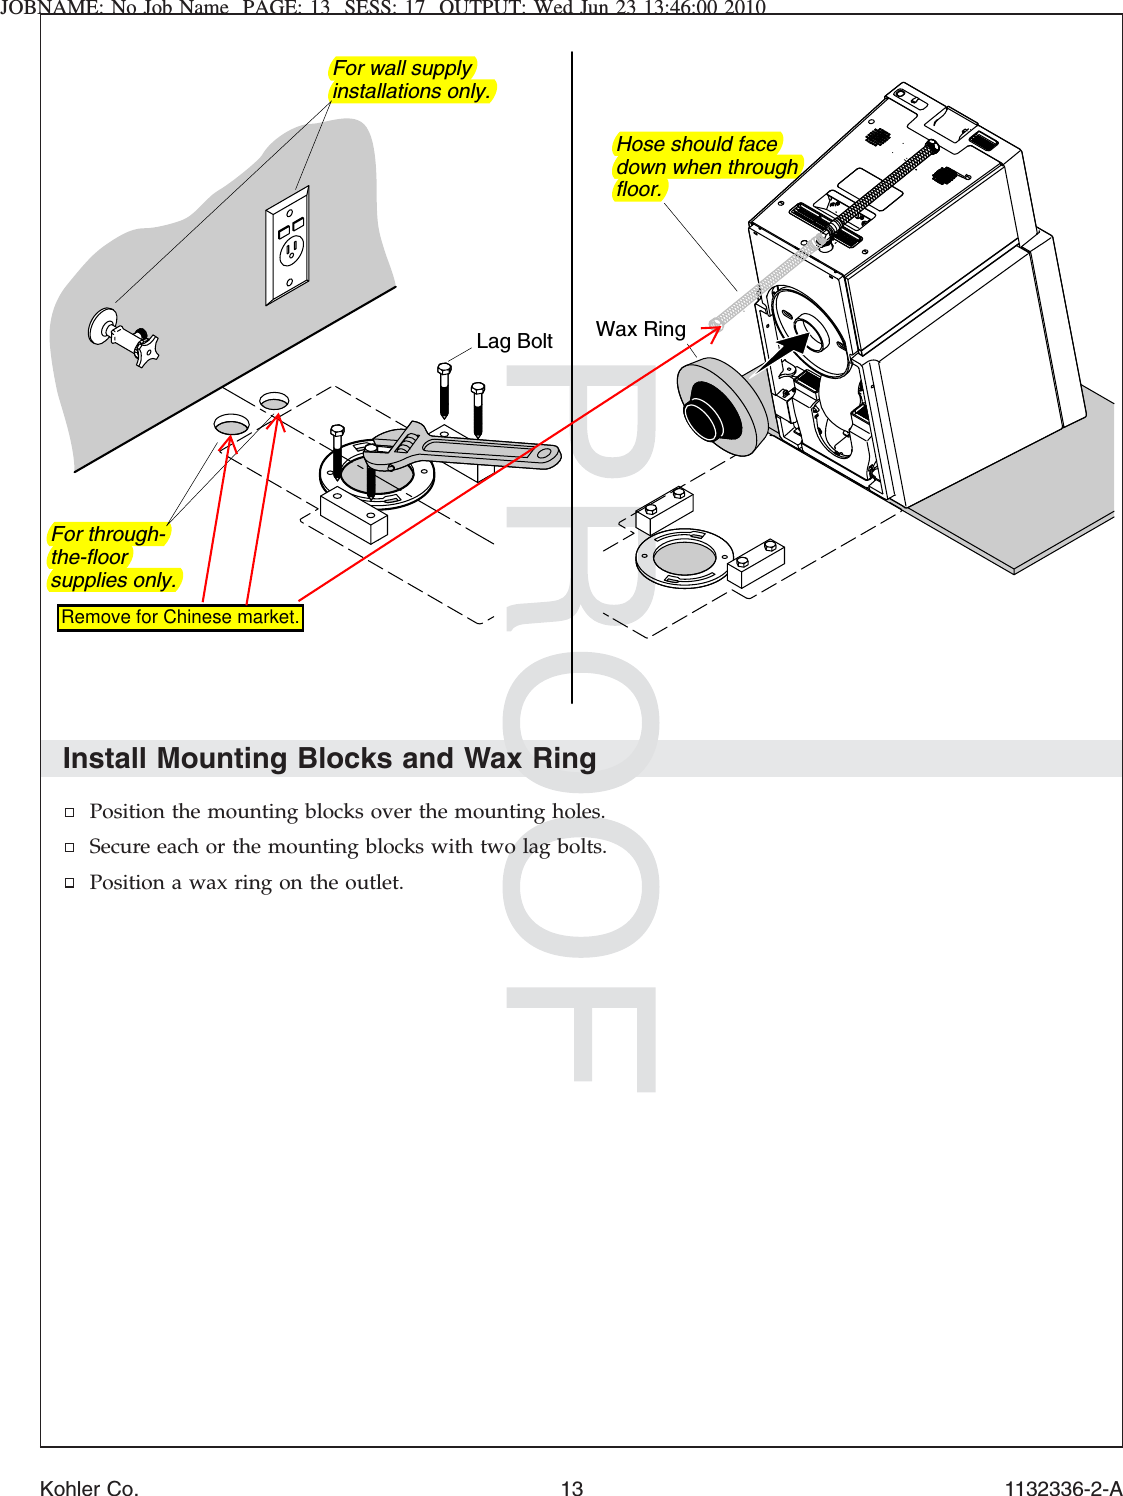 JOBNAME: No Job Name PAGE: 13 SESS: 17 OUTPUT: Wed Jun 23 13:46:00 2010Install Mounting Blocks and Wax RingPosition the mounting blocks over the mounting holes.Secure each or the mounting blocks with two lag bolts.Position a wax ring on the outlet.Lag Bolt Wax RingFor wall supply installations only.For through-the-floor supplies only.Hose should face down when through floor.Kohler Co. 13 1132336-2-ARemove for Chinese market.